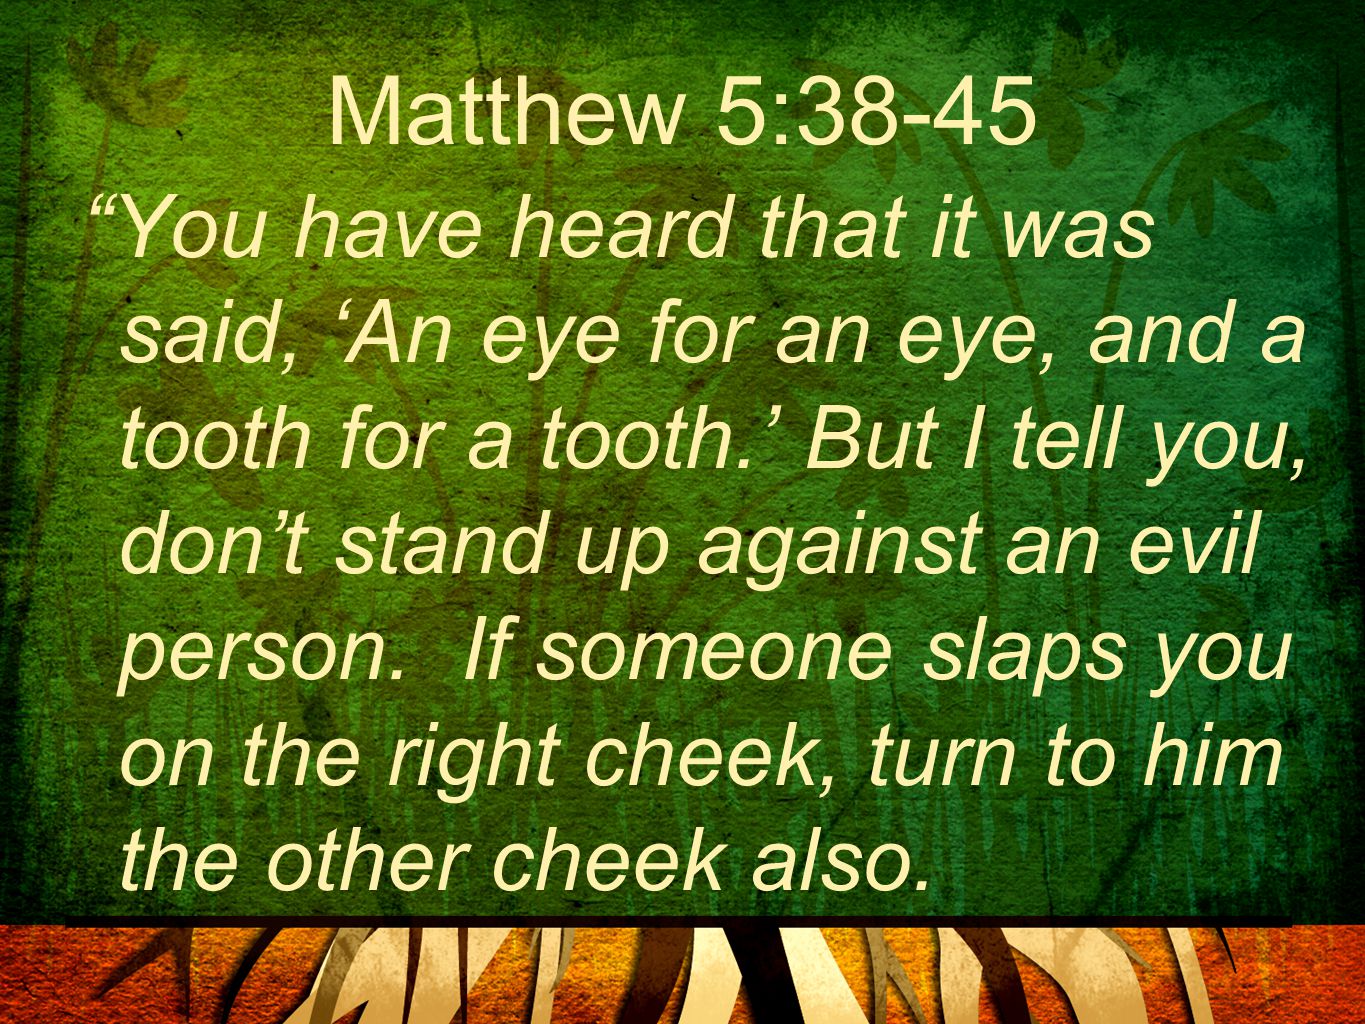 Matthew 5:38-45 You have heard that it was said, ‘An eye for an eye, and a tooth for a tooth.’ But I tell you, don’t stand up against an evil person.